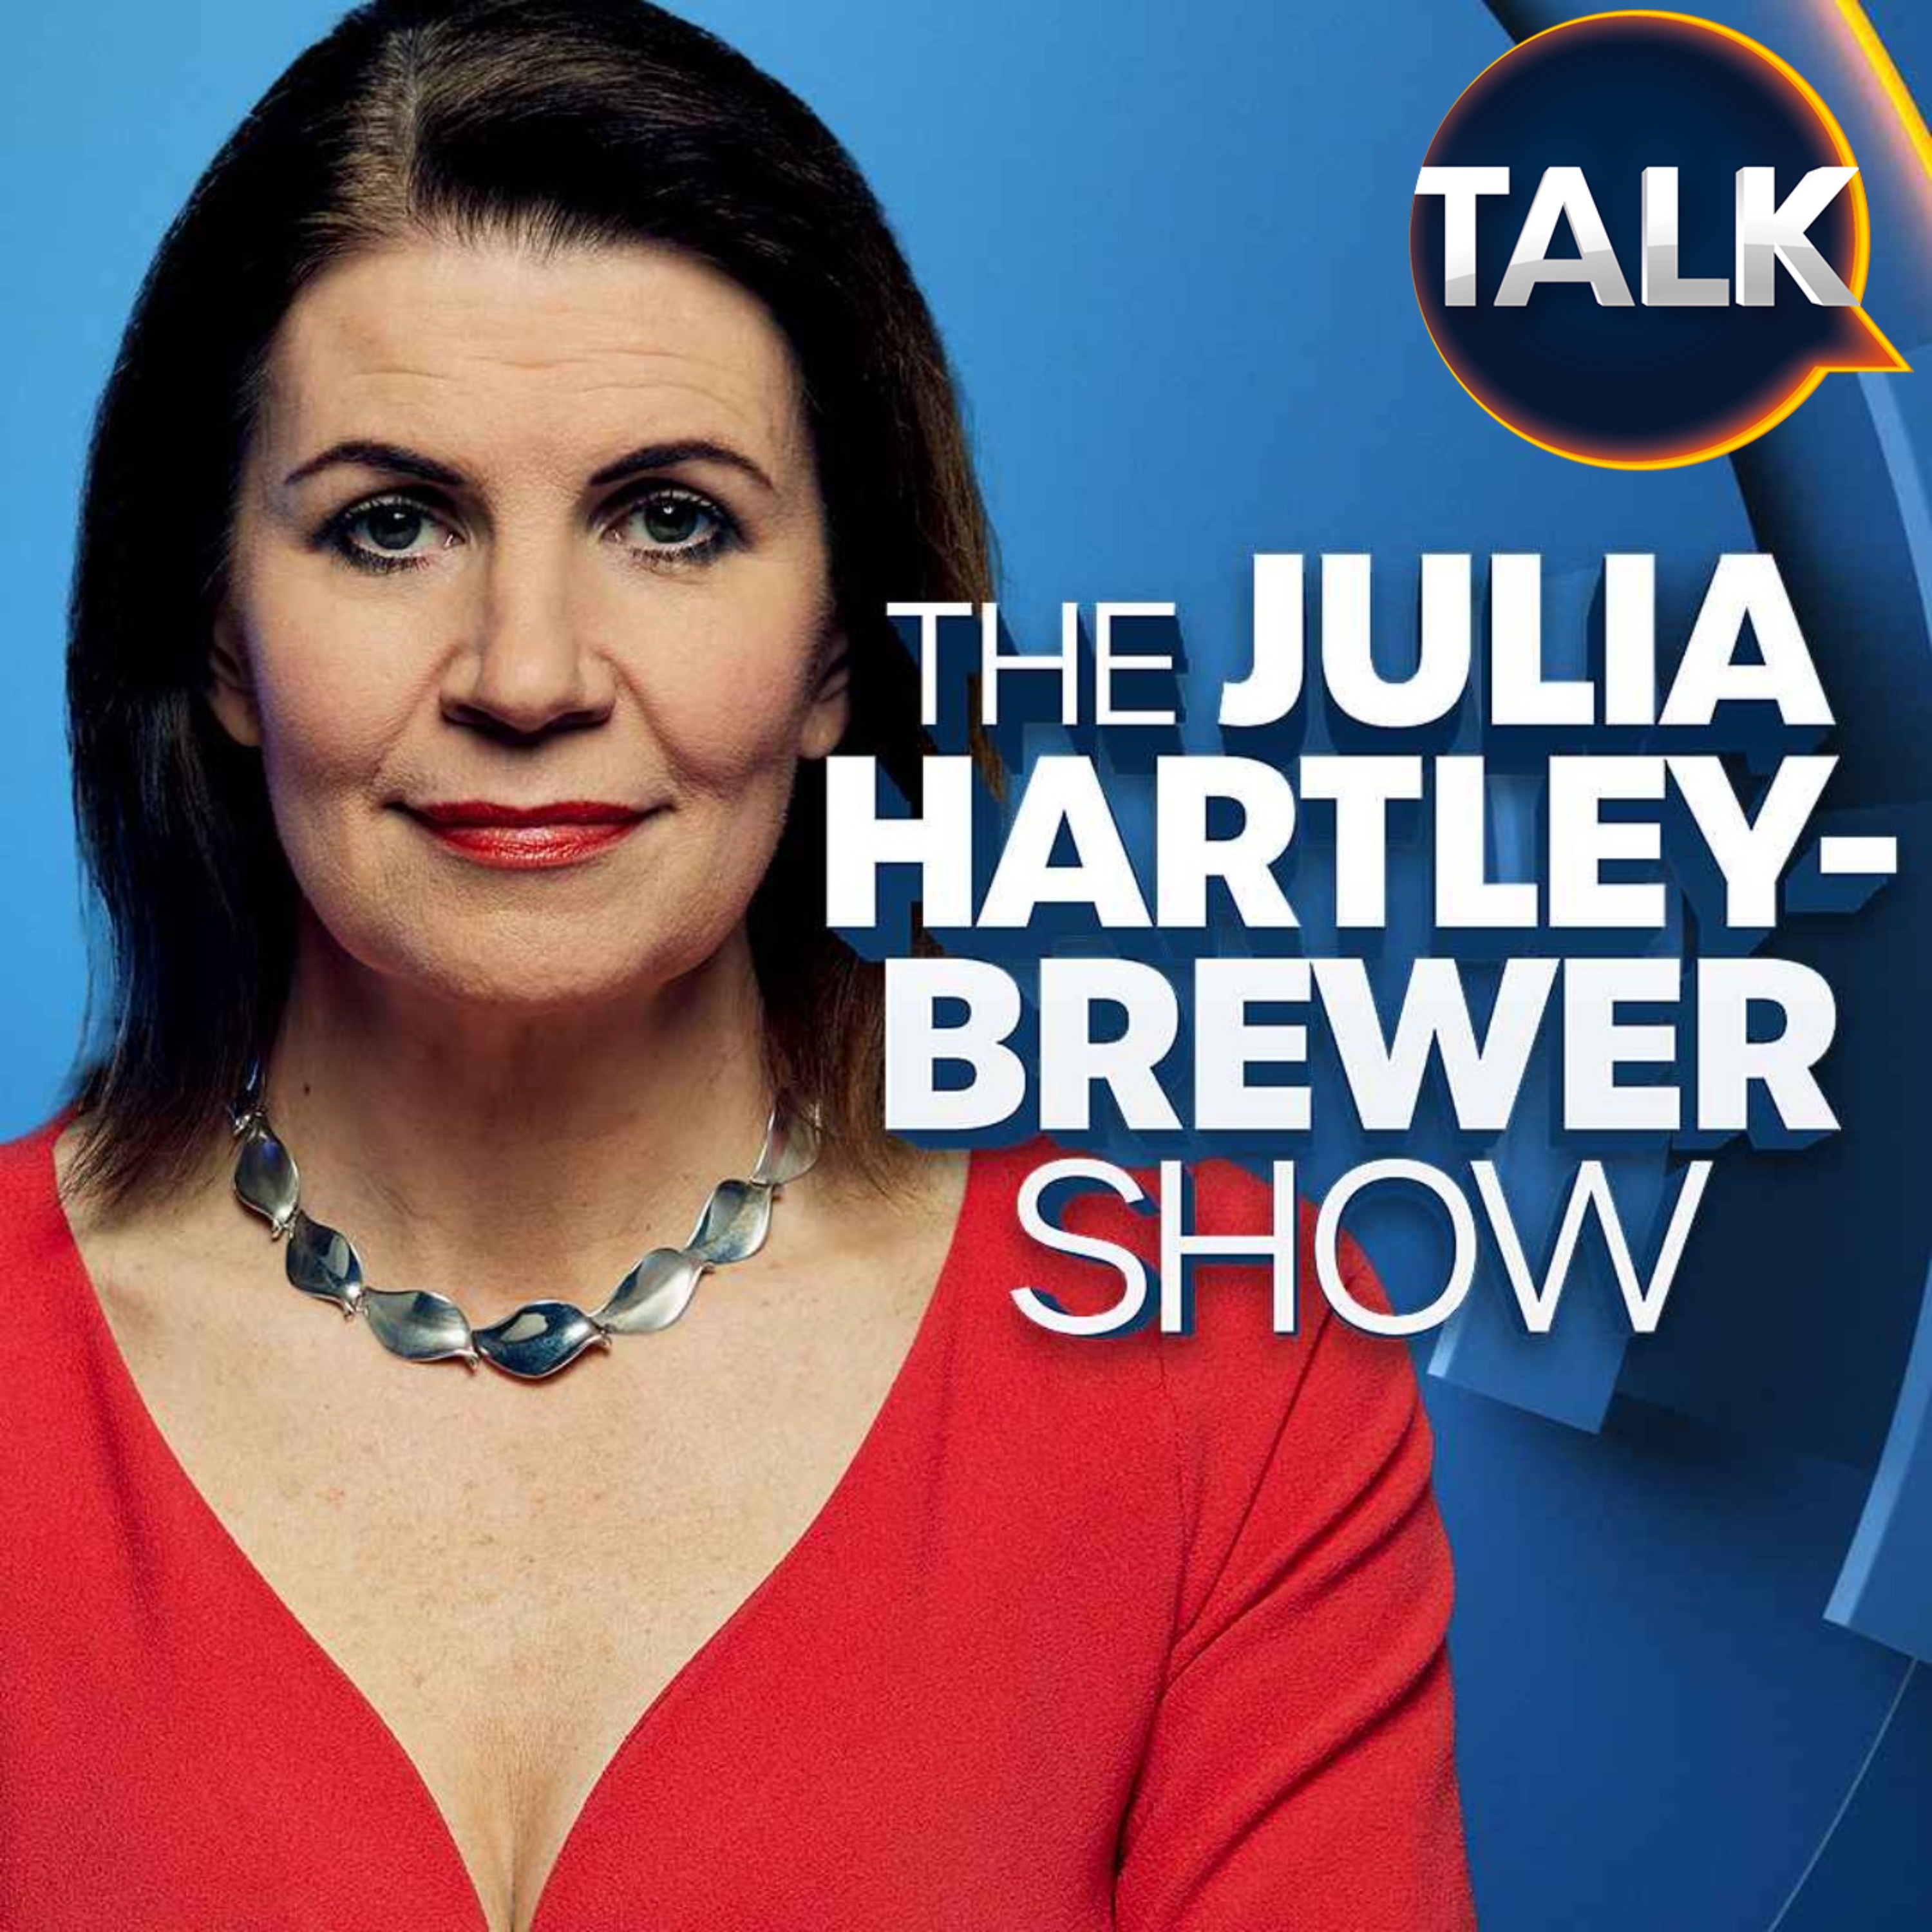 cover art for Julia Hartley - Brewer | PM warns of Europe second wave amid Spain quarantine row, Heathrow boss urges government to allow testing on arrival, Sending untested patients to care homes was reckless says MPs